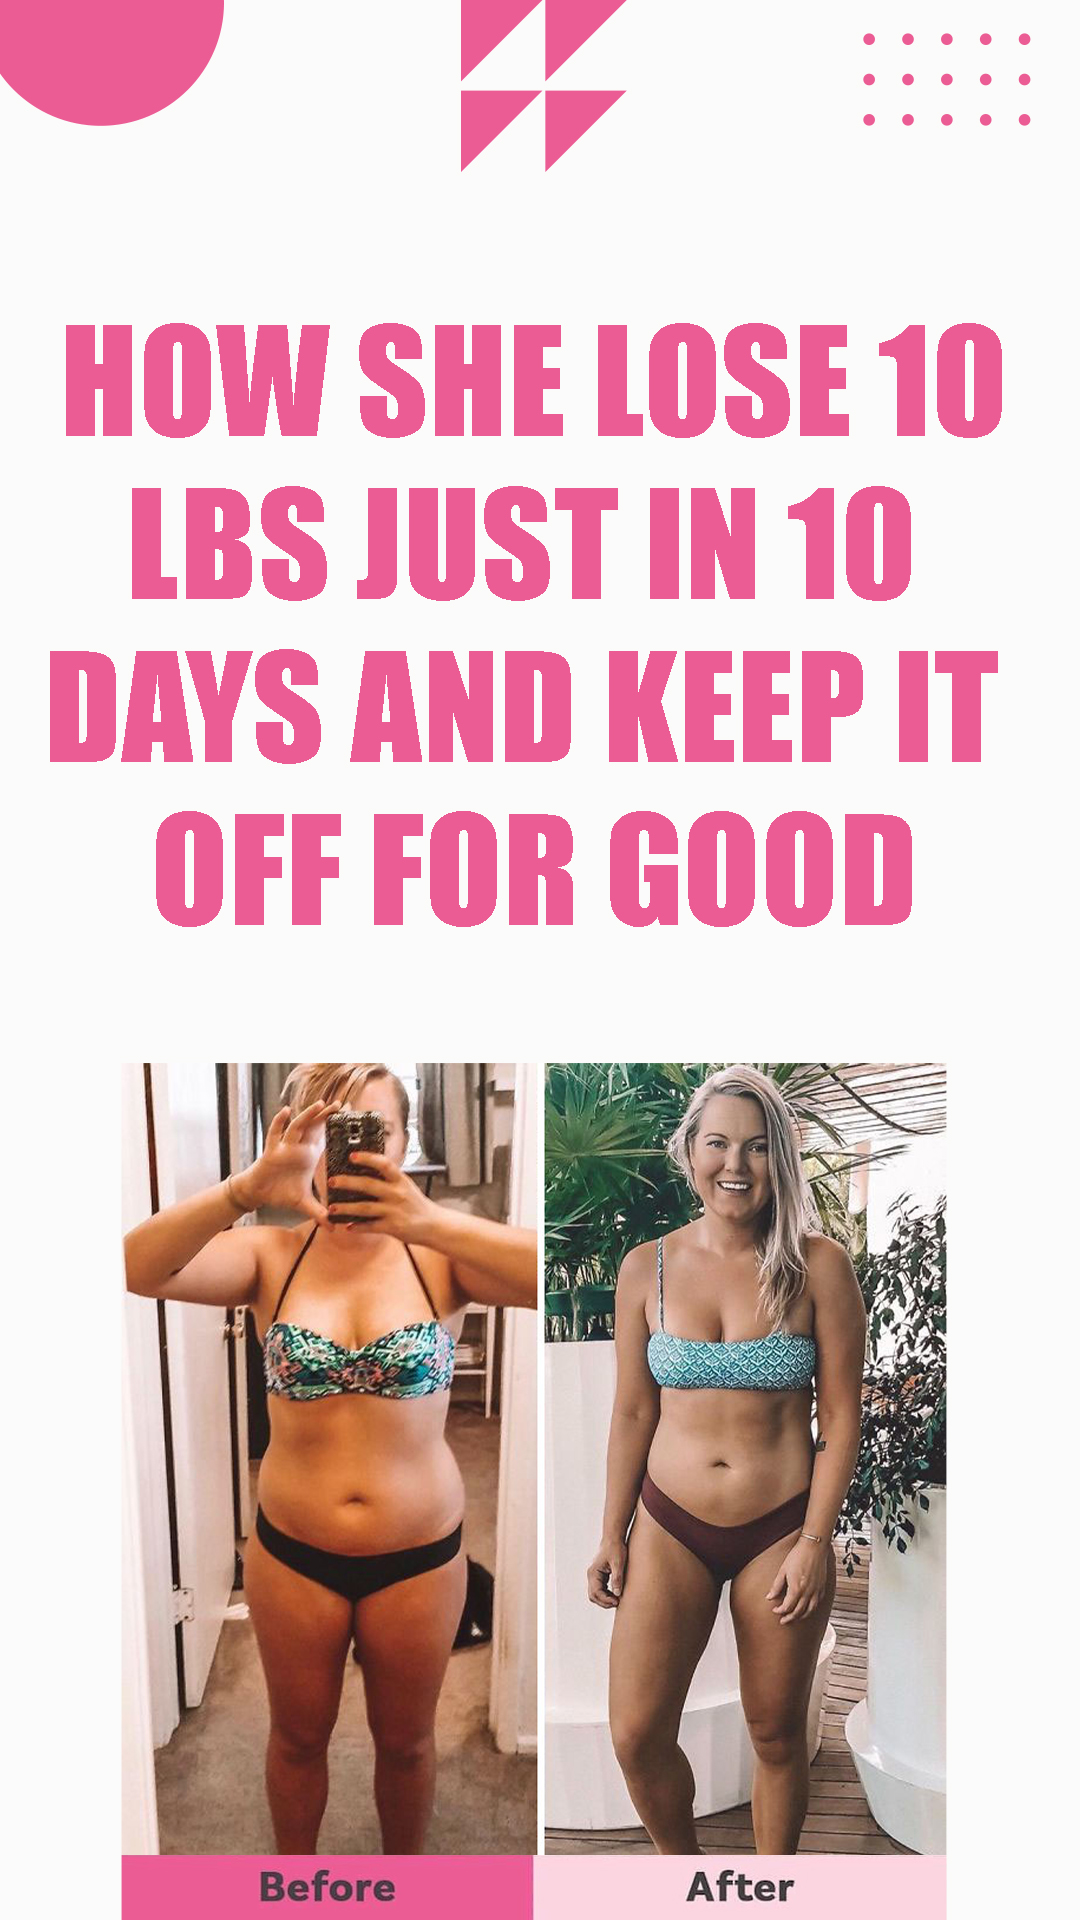 Lose 10lbs Just in 10 Days and Keep It Off for Good